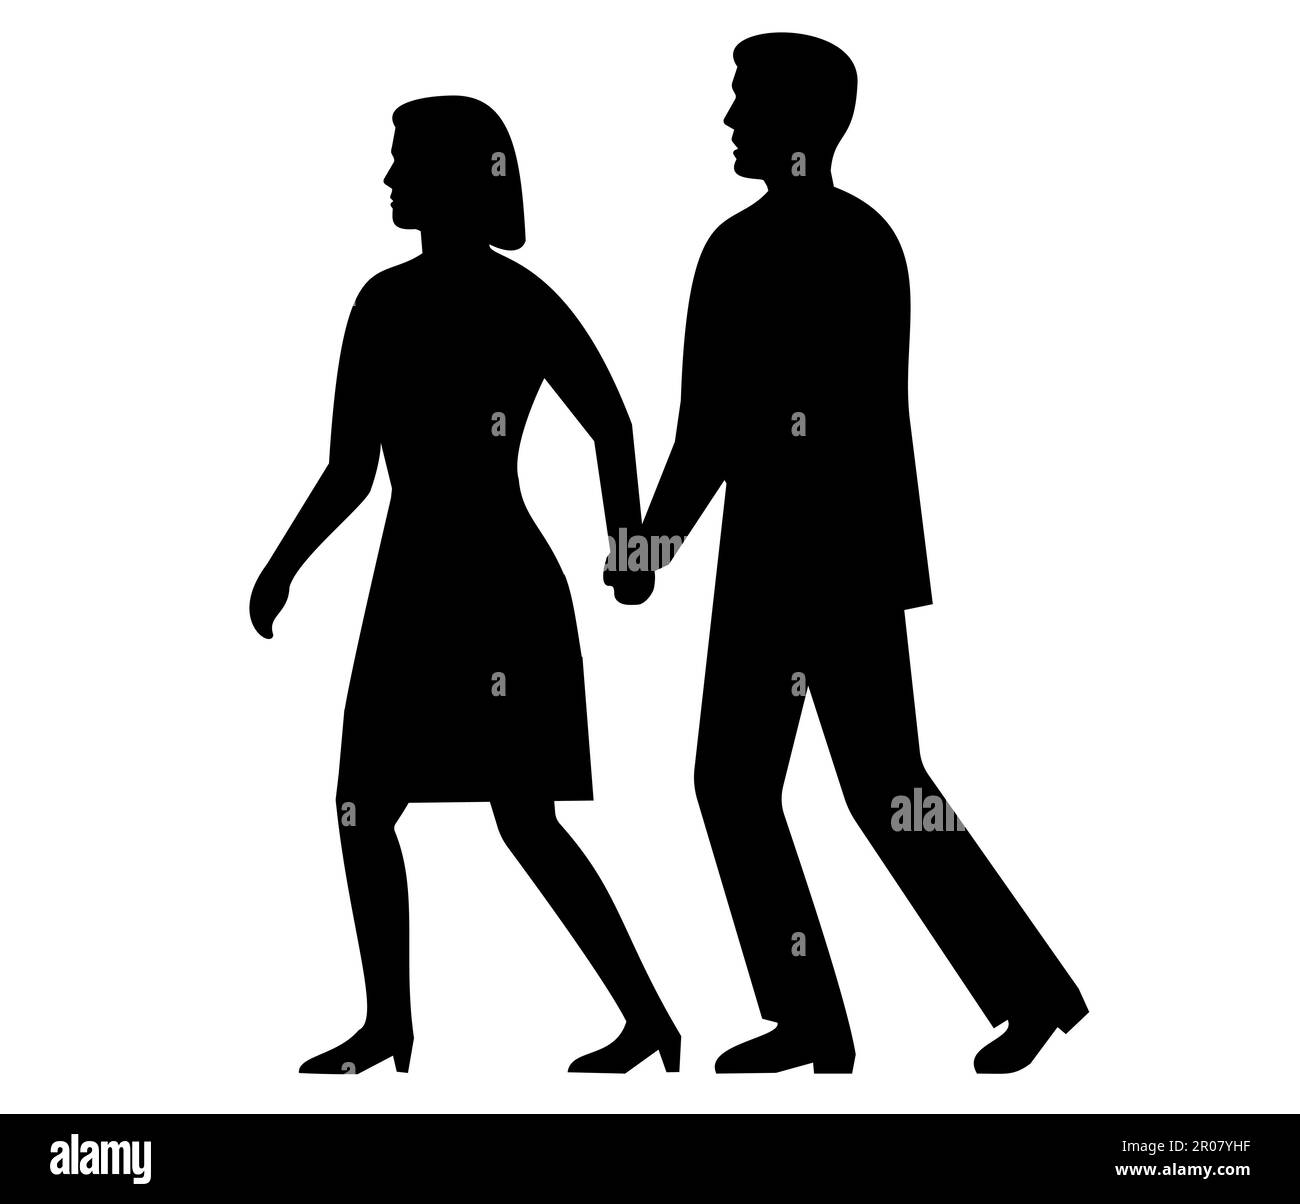 Retro style illustration of a silhouette of a couple male and female walking away holding hands on isolated background done in black and white. Stock Photo